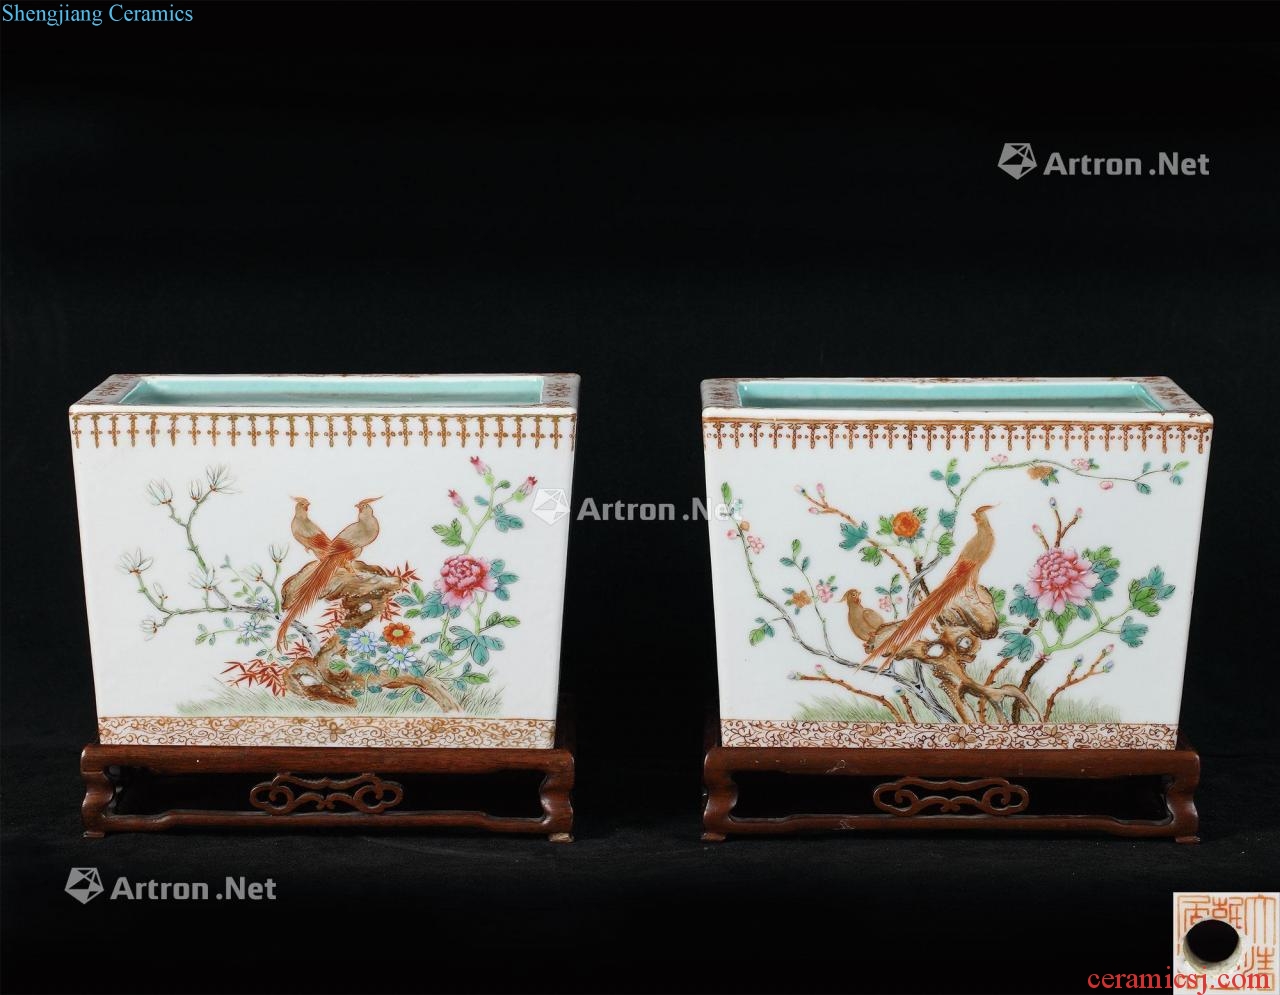 Pastel pheasant riches and honour in the qing dynasty painting of flowers and grain square basin (a)